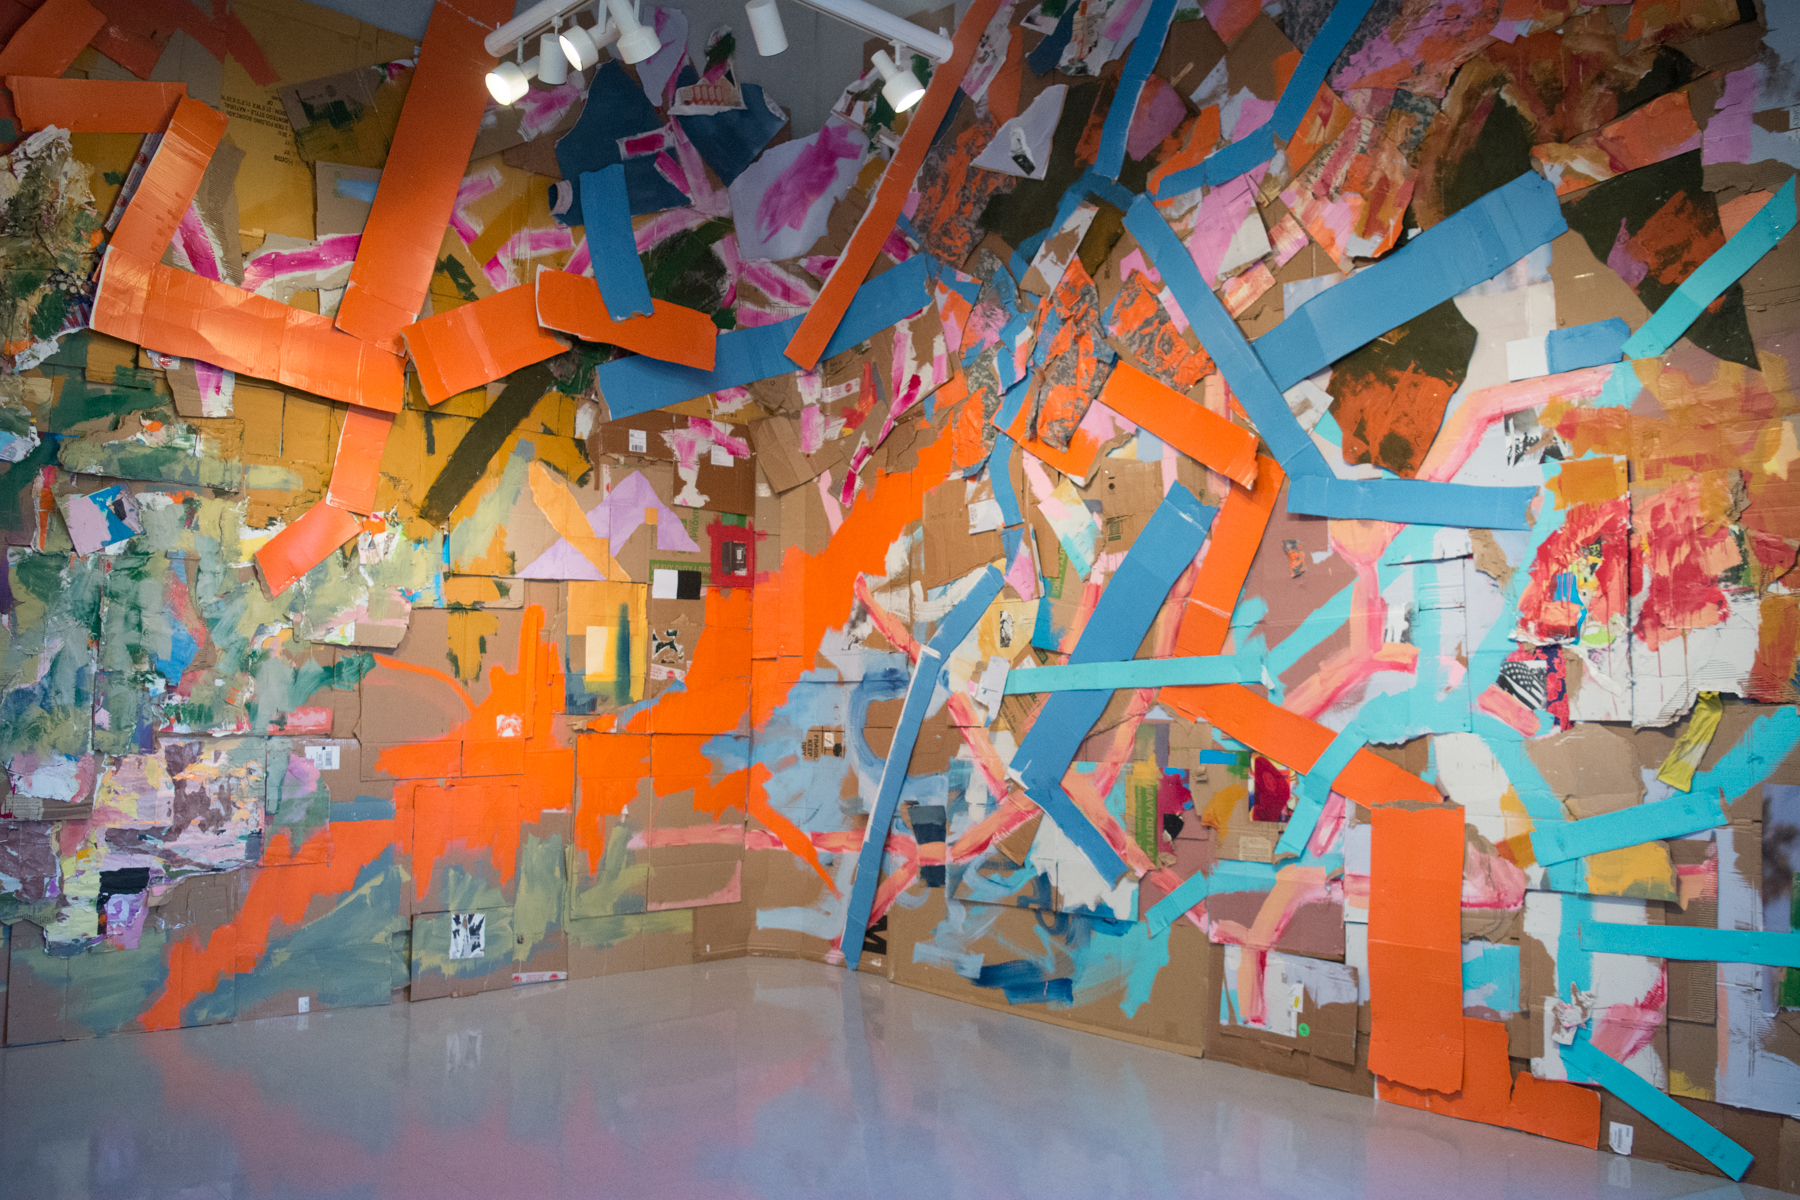 A large floor to ceiling painting installation by Peter Ahart, titled Portrait of an American Solider, hangs in the back of the gallery. The piece is a painting on cardboard, fabric, and collage paper. Orange and blue marks wind through the painting that spans three walls. 